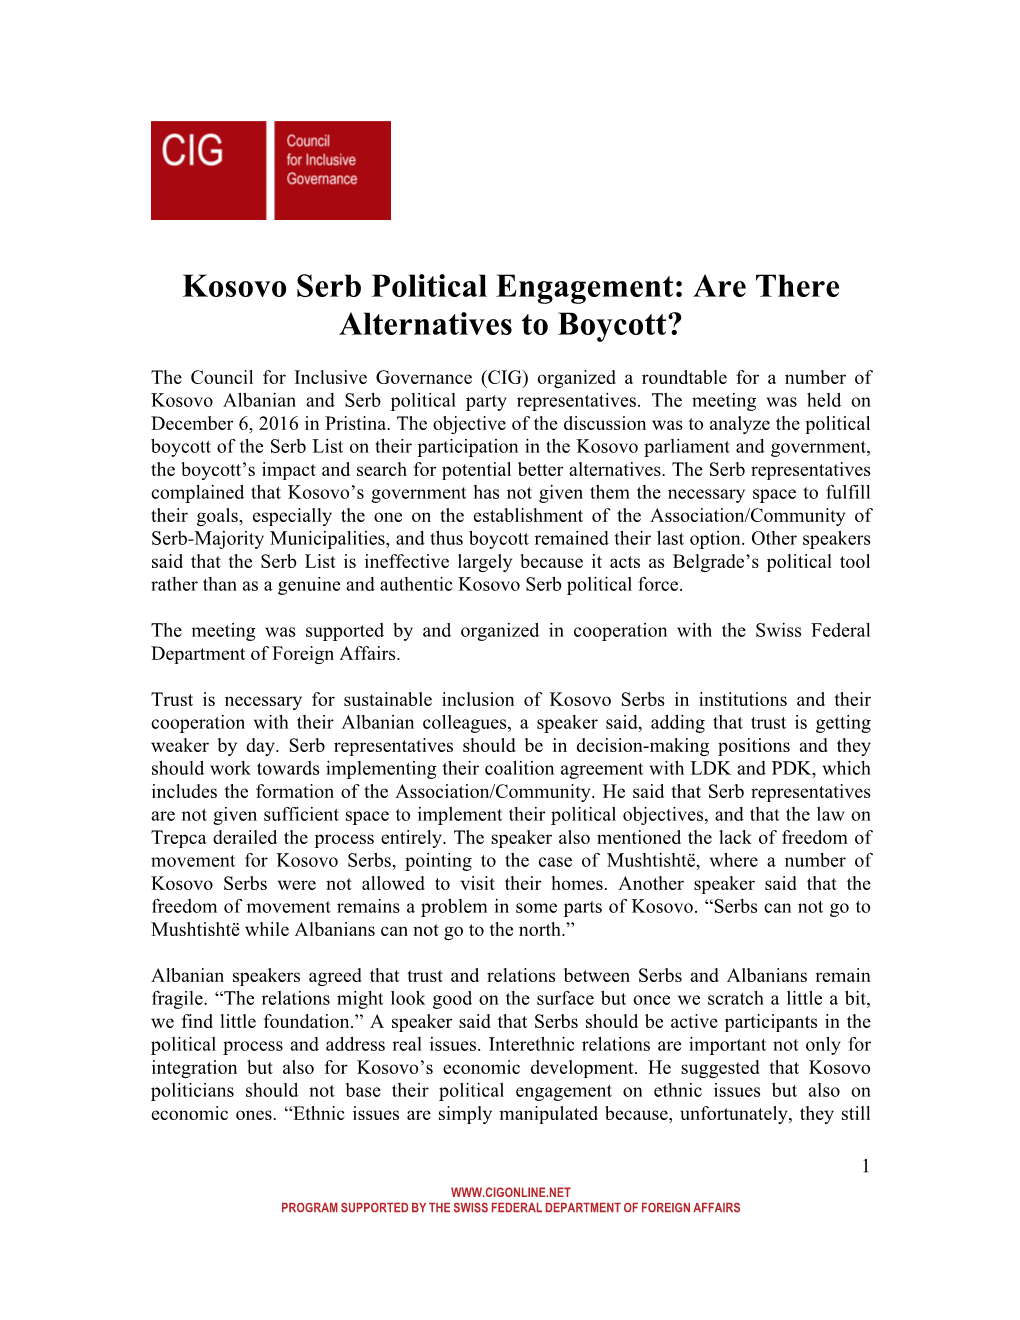 Kosovo Serb Political Engagement: Are There Alternatives to Boycott?